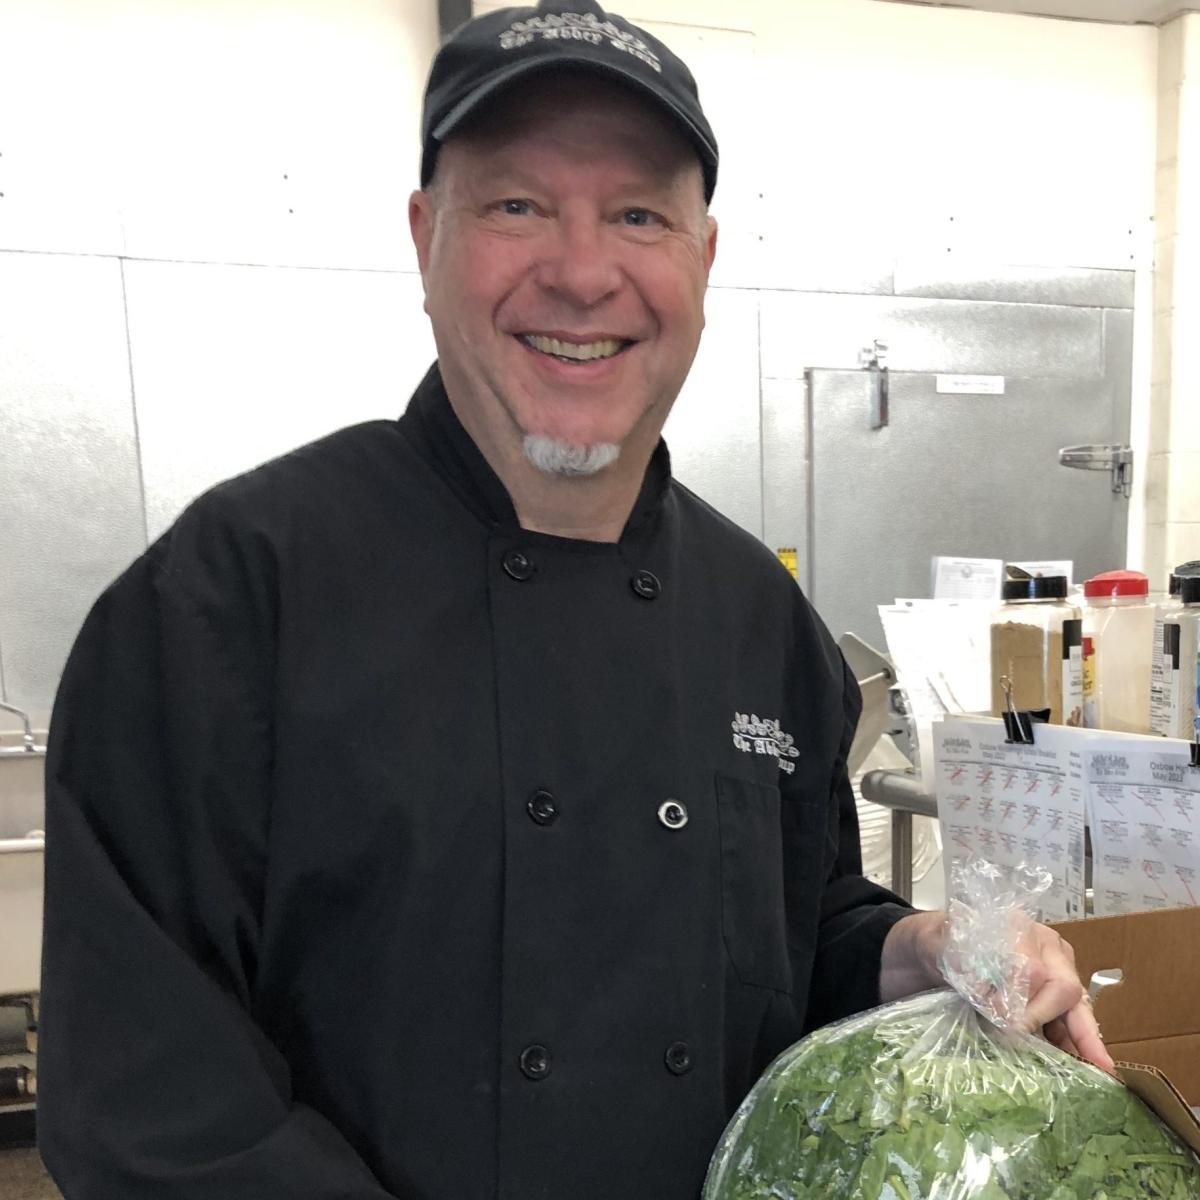 Food Service Director Bob Hildebrand holds local spinach (a Harvest of the Month product) grown at Joe’s Brook Farm and sourced through Green Mountain Farm Direct.